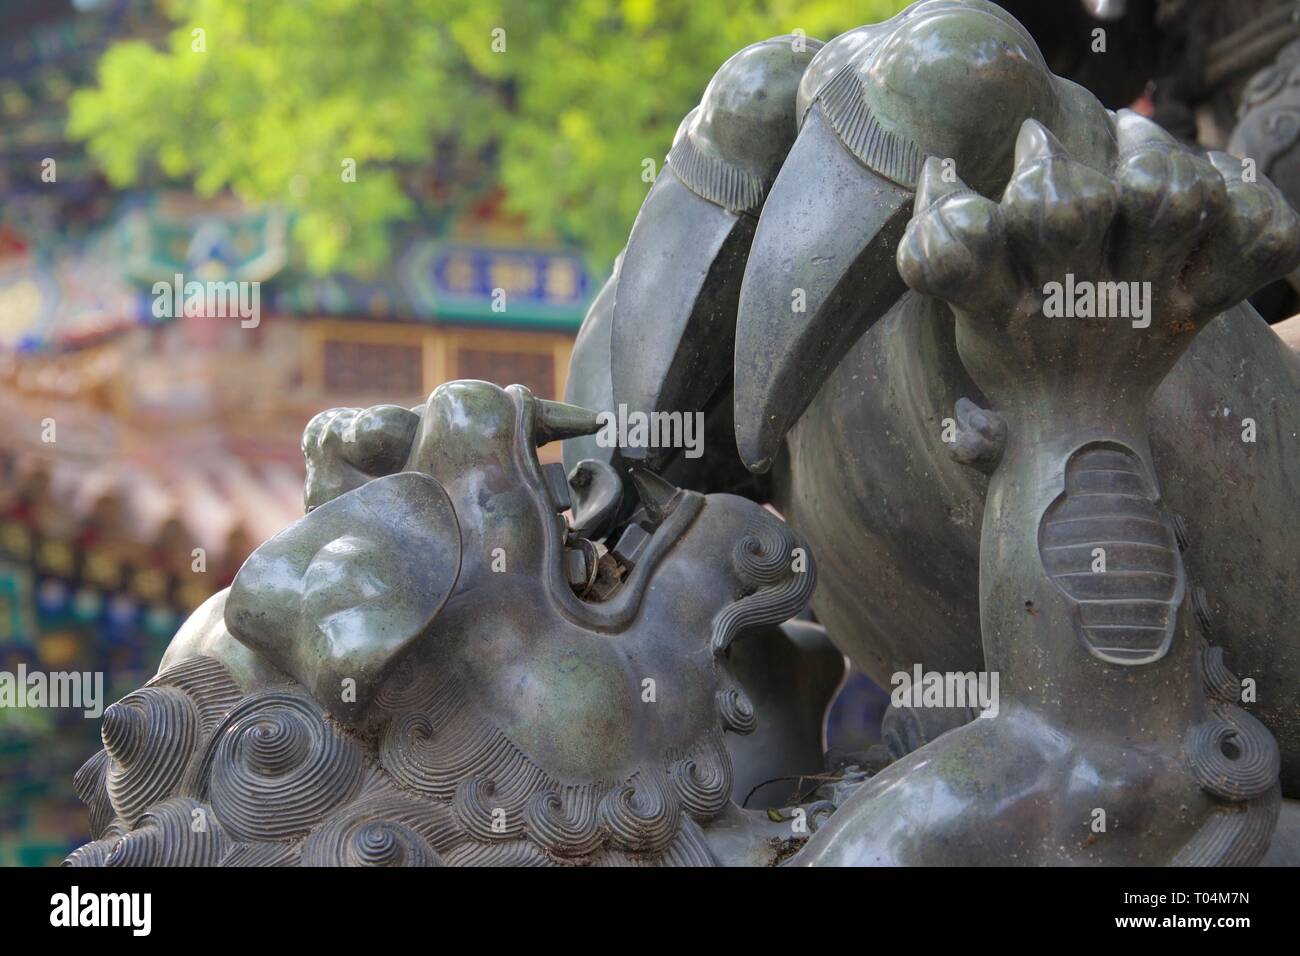 Close up of baby lion / dragon statue, playing with parent's claw. Chinese mythology, baring teeth and growling. Stock Photo